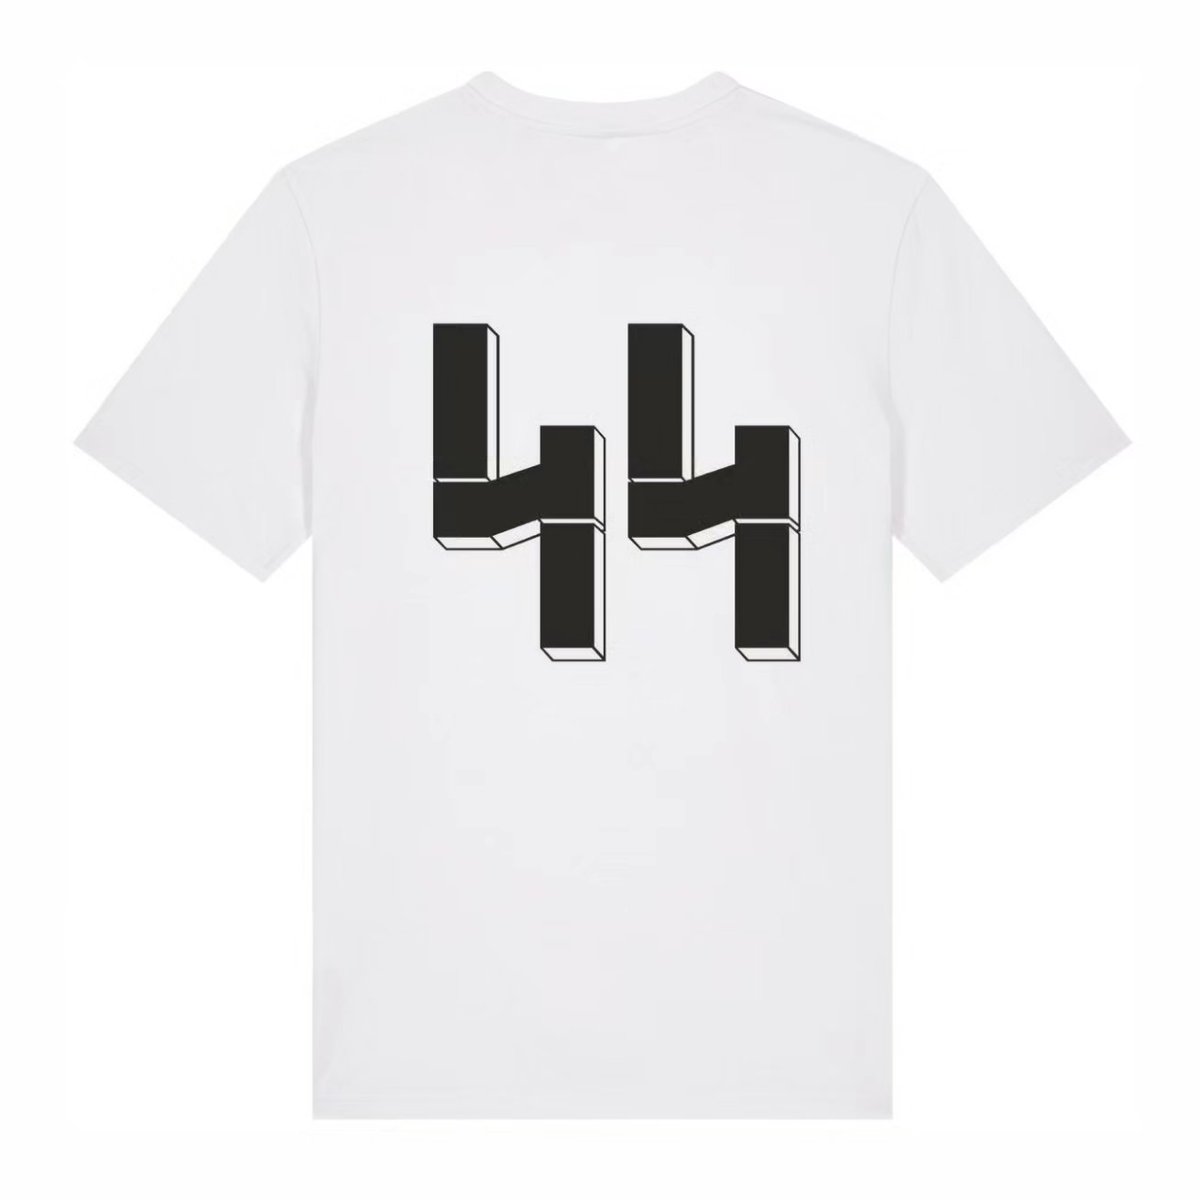 Limited Edition Retro #Germany T-shirt with the classic 44 number